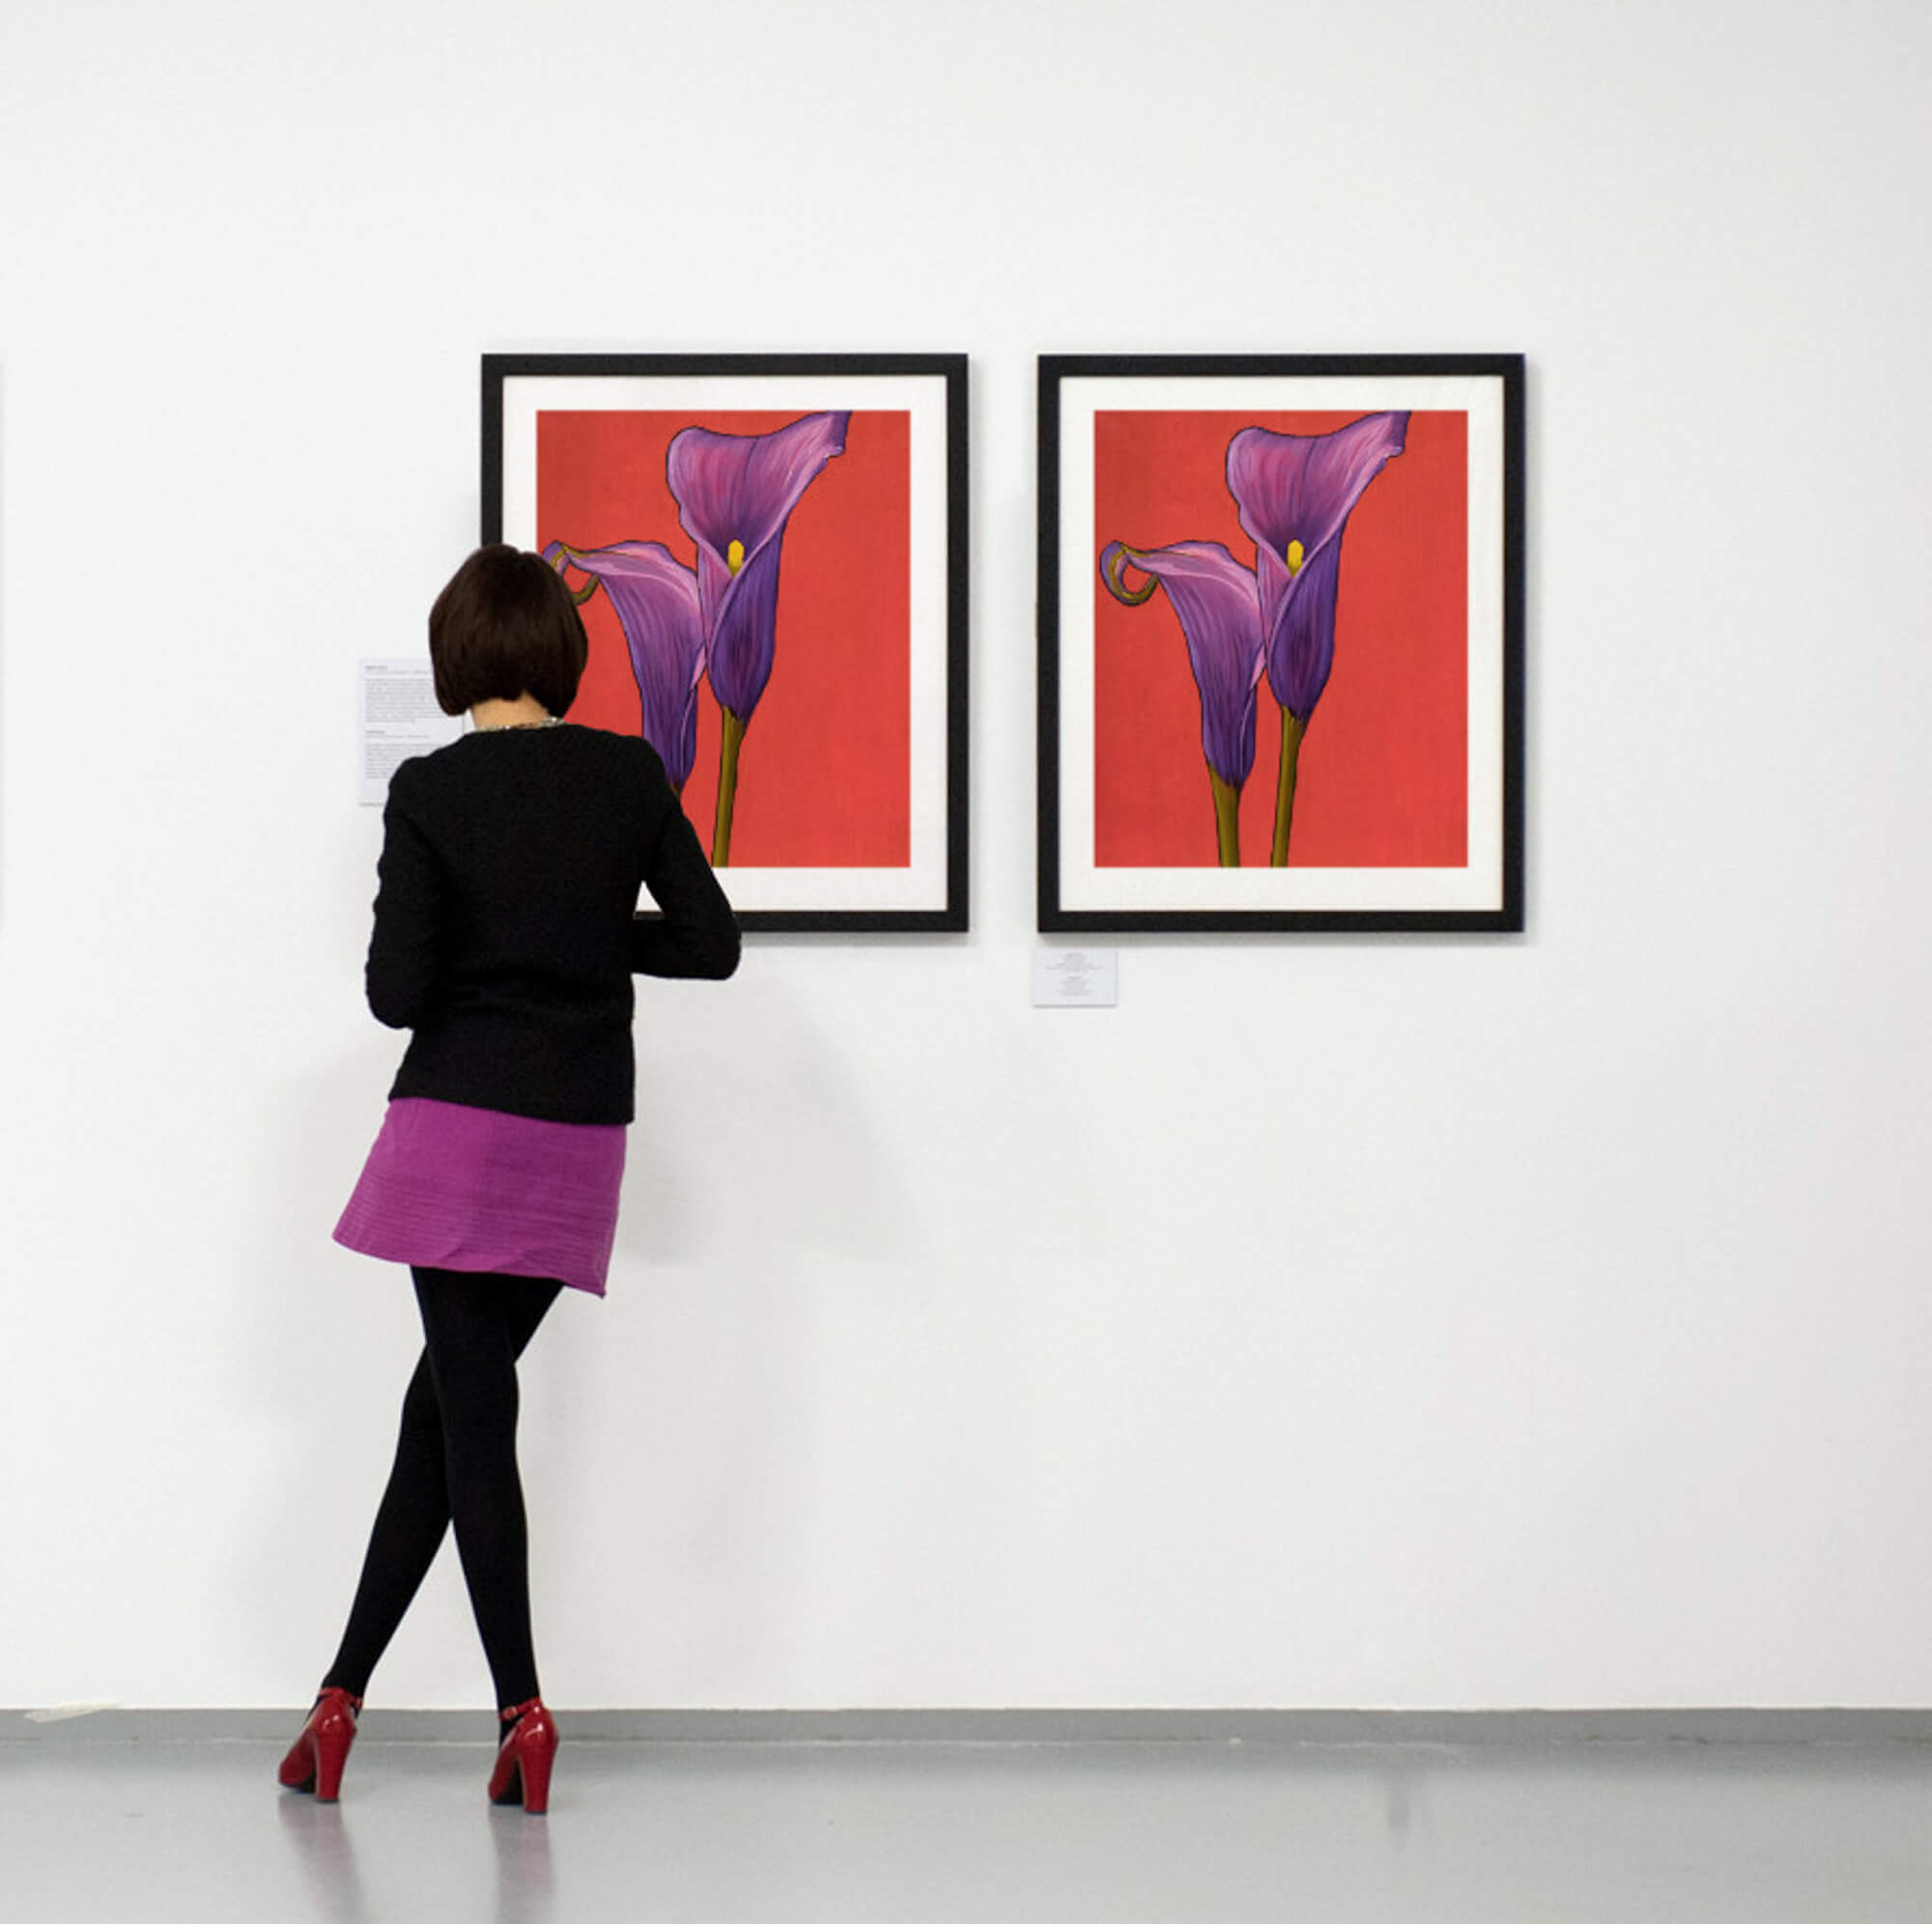 Two Purple Calla Lilies in full bloom with a red backdrop paintings in an art gallery with patron viewing